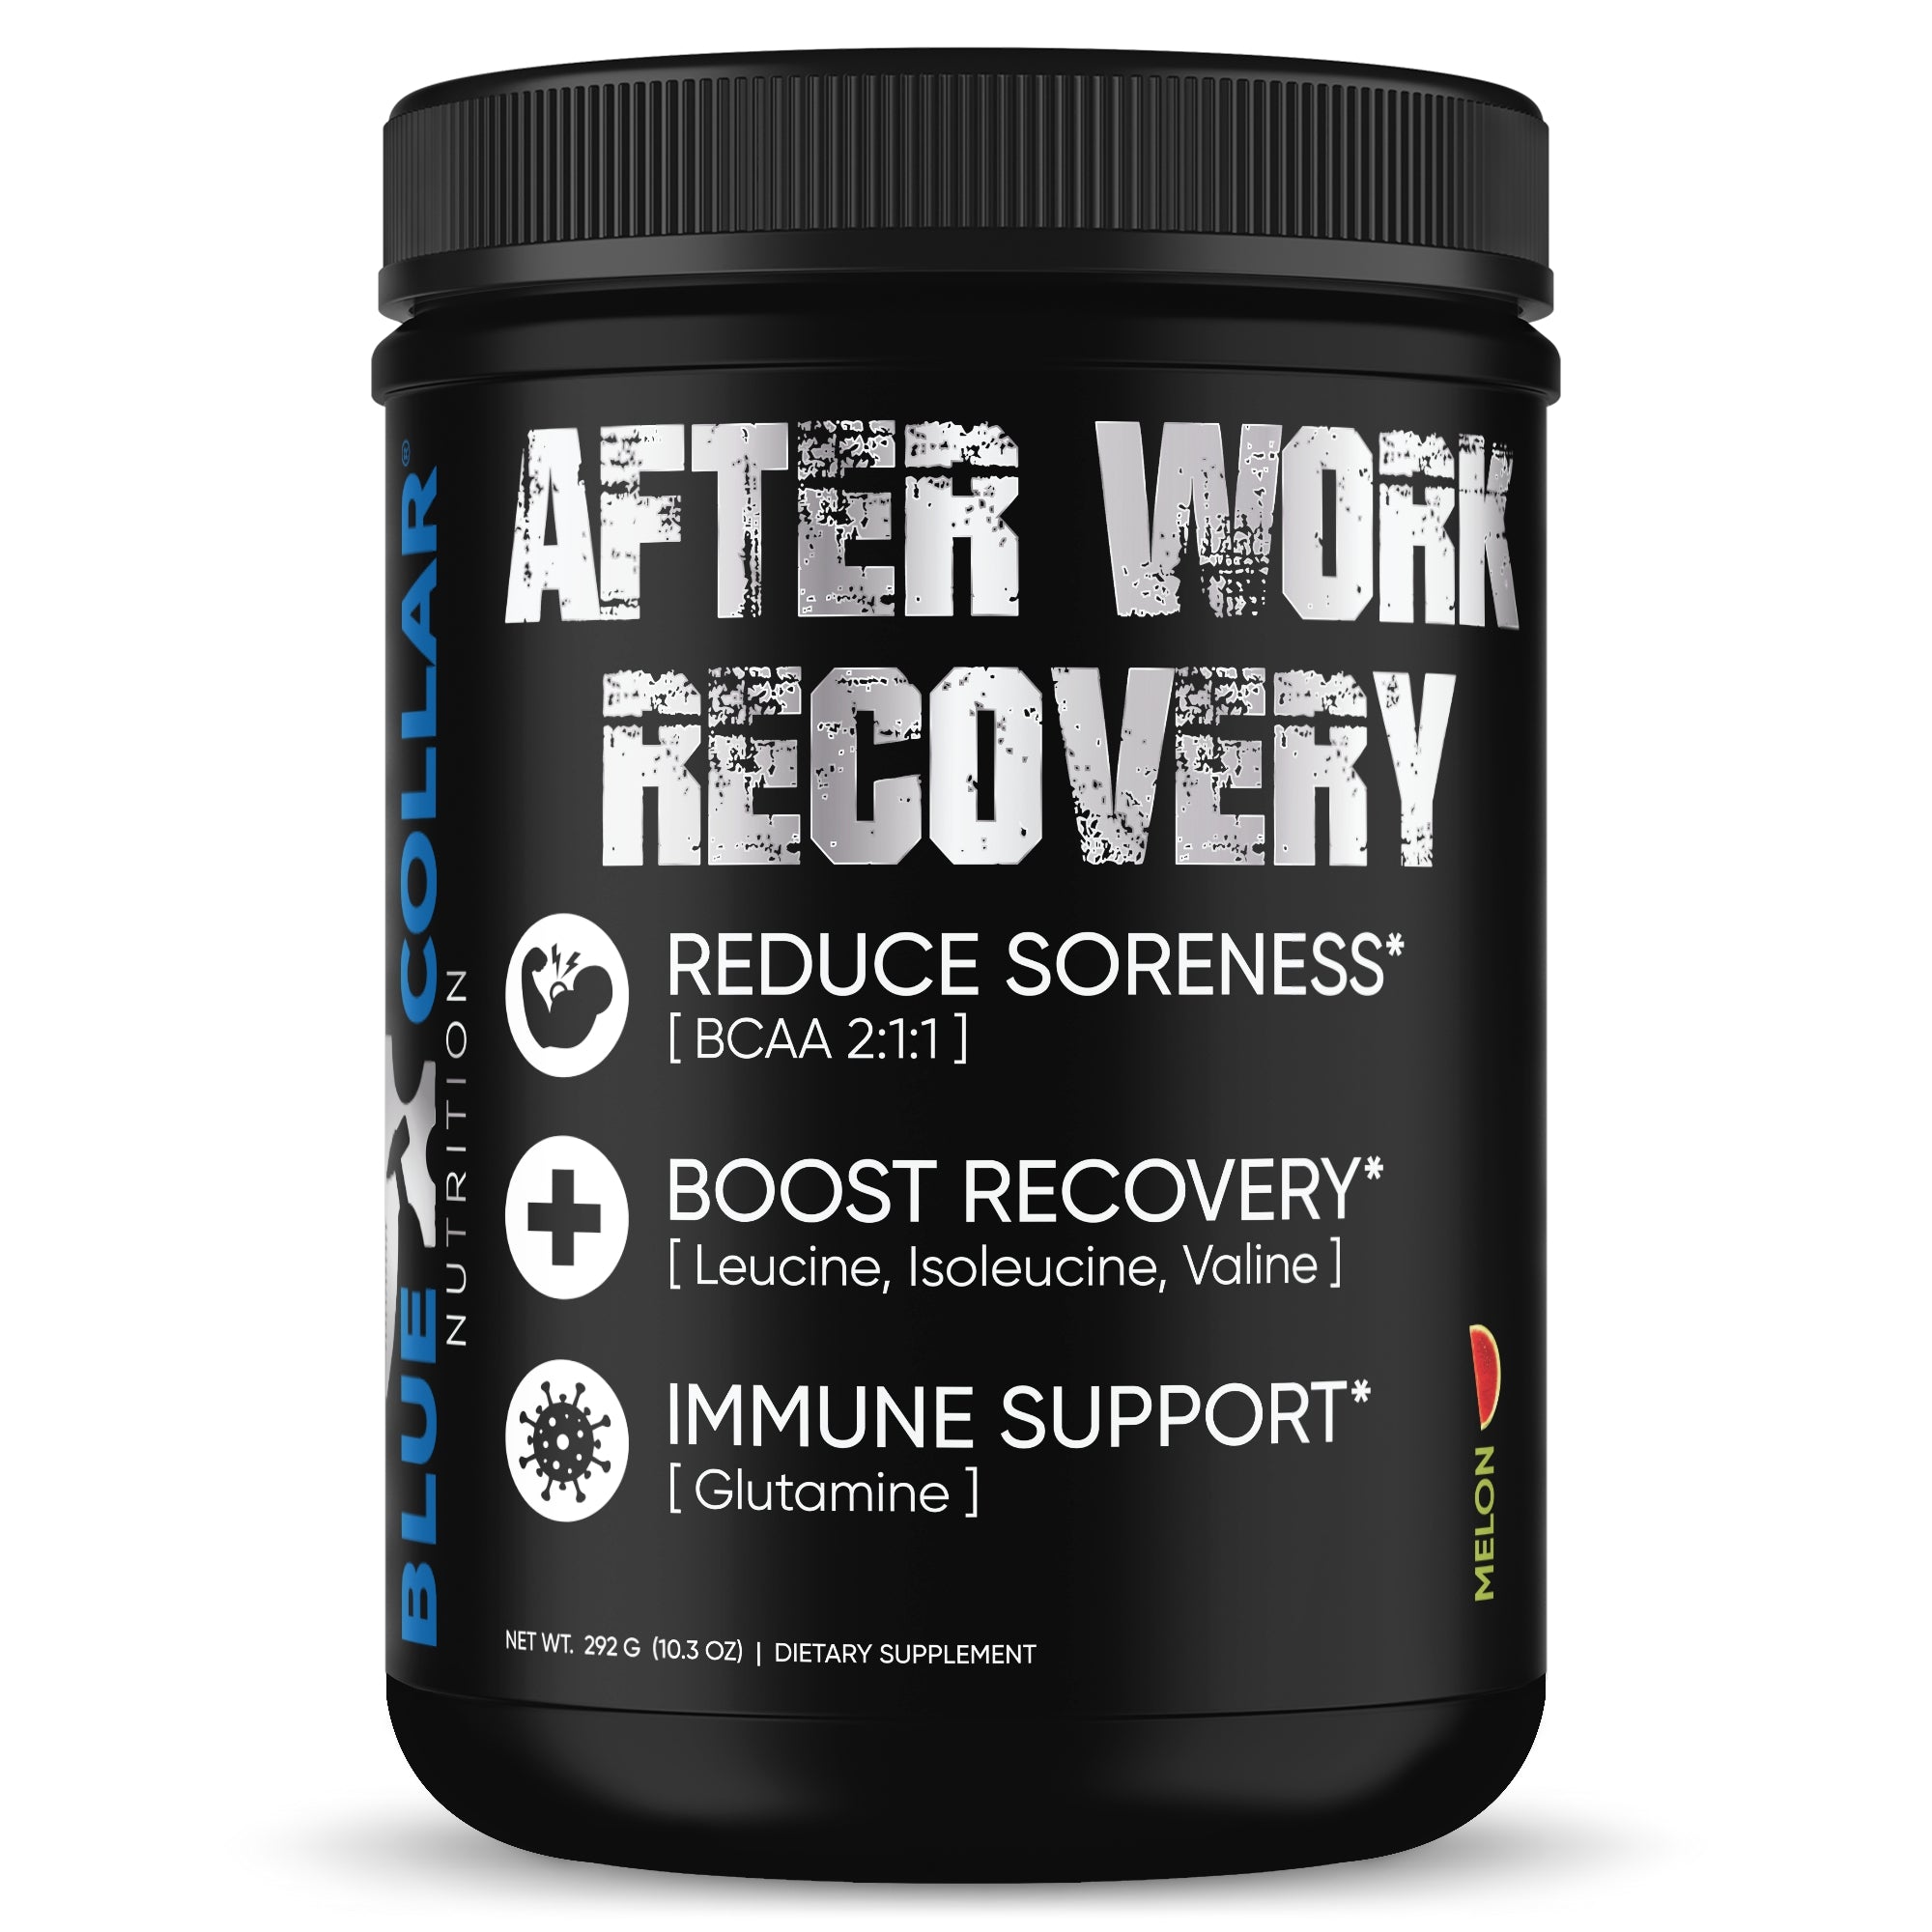 After Work Recovery-supplements for blue collar workers-Blue Collar Nutrition